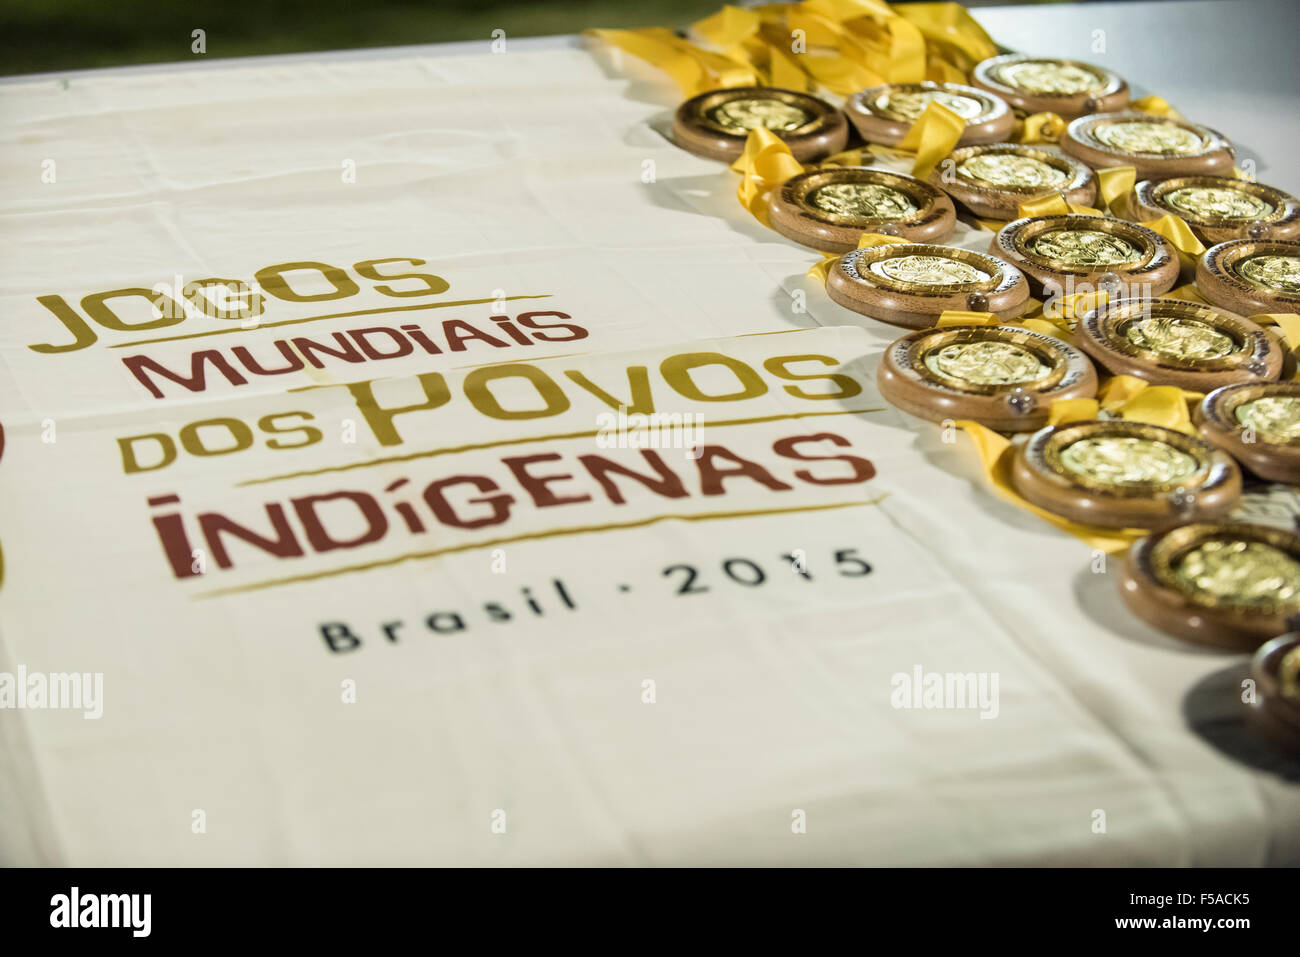 Palmas, Brazil. 30th October, 2015. Gold medals for the winners of the women's football lie on a table. The match between the local Xerente tribe and the Native American team from the USA at the International Indigenous Games in the city of Palmas, Tocantins State, Brazil was won by the USA on a penalty shoot-out after a 0-0 match. Credit:  Sue Cunningham Photographic/Alamy Live News Stock Photo